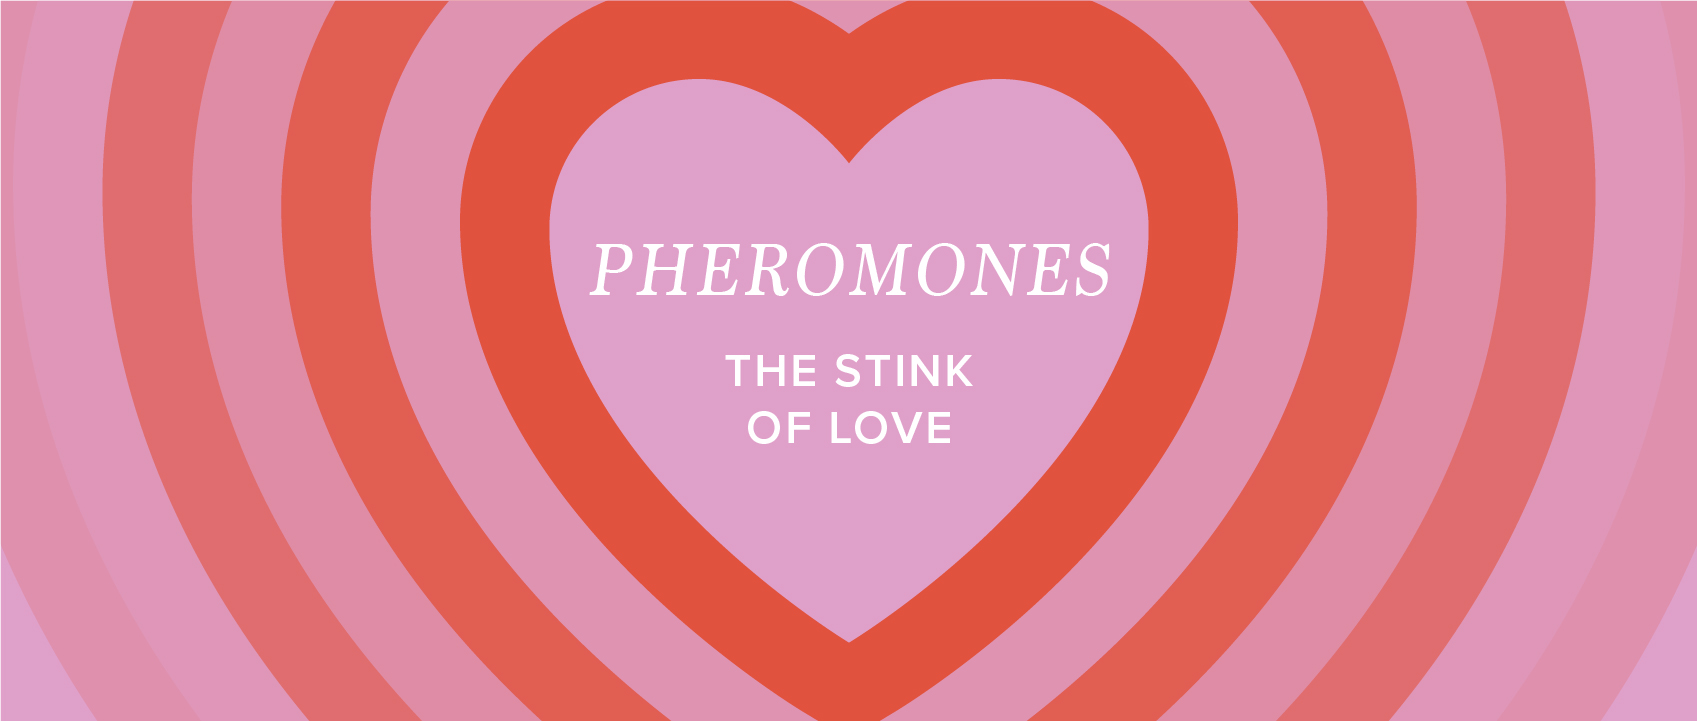 title pheromones, the stink of love in pink and red hearts